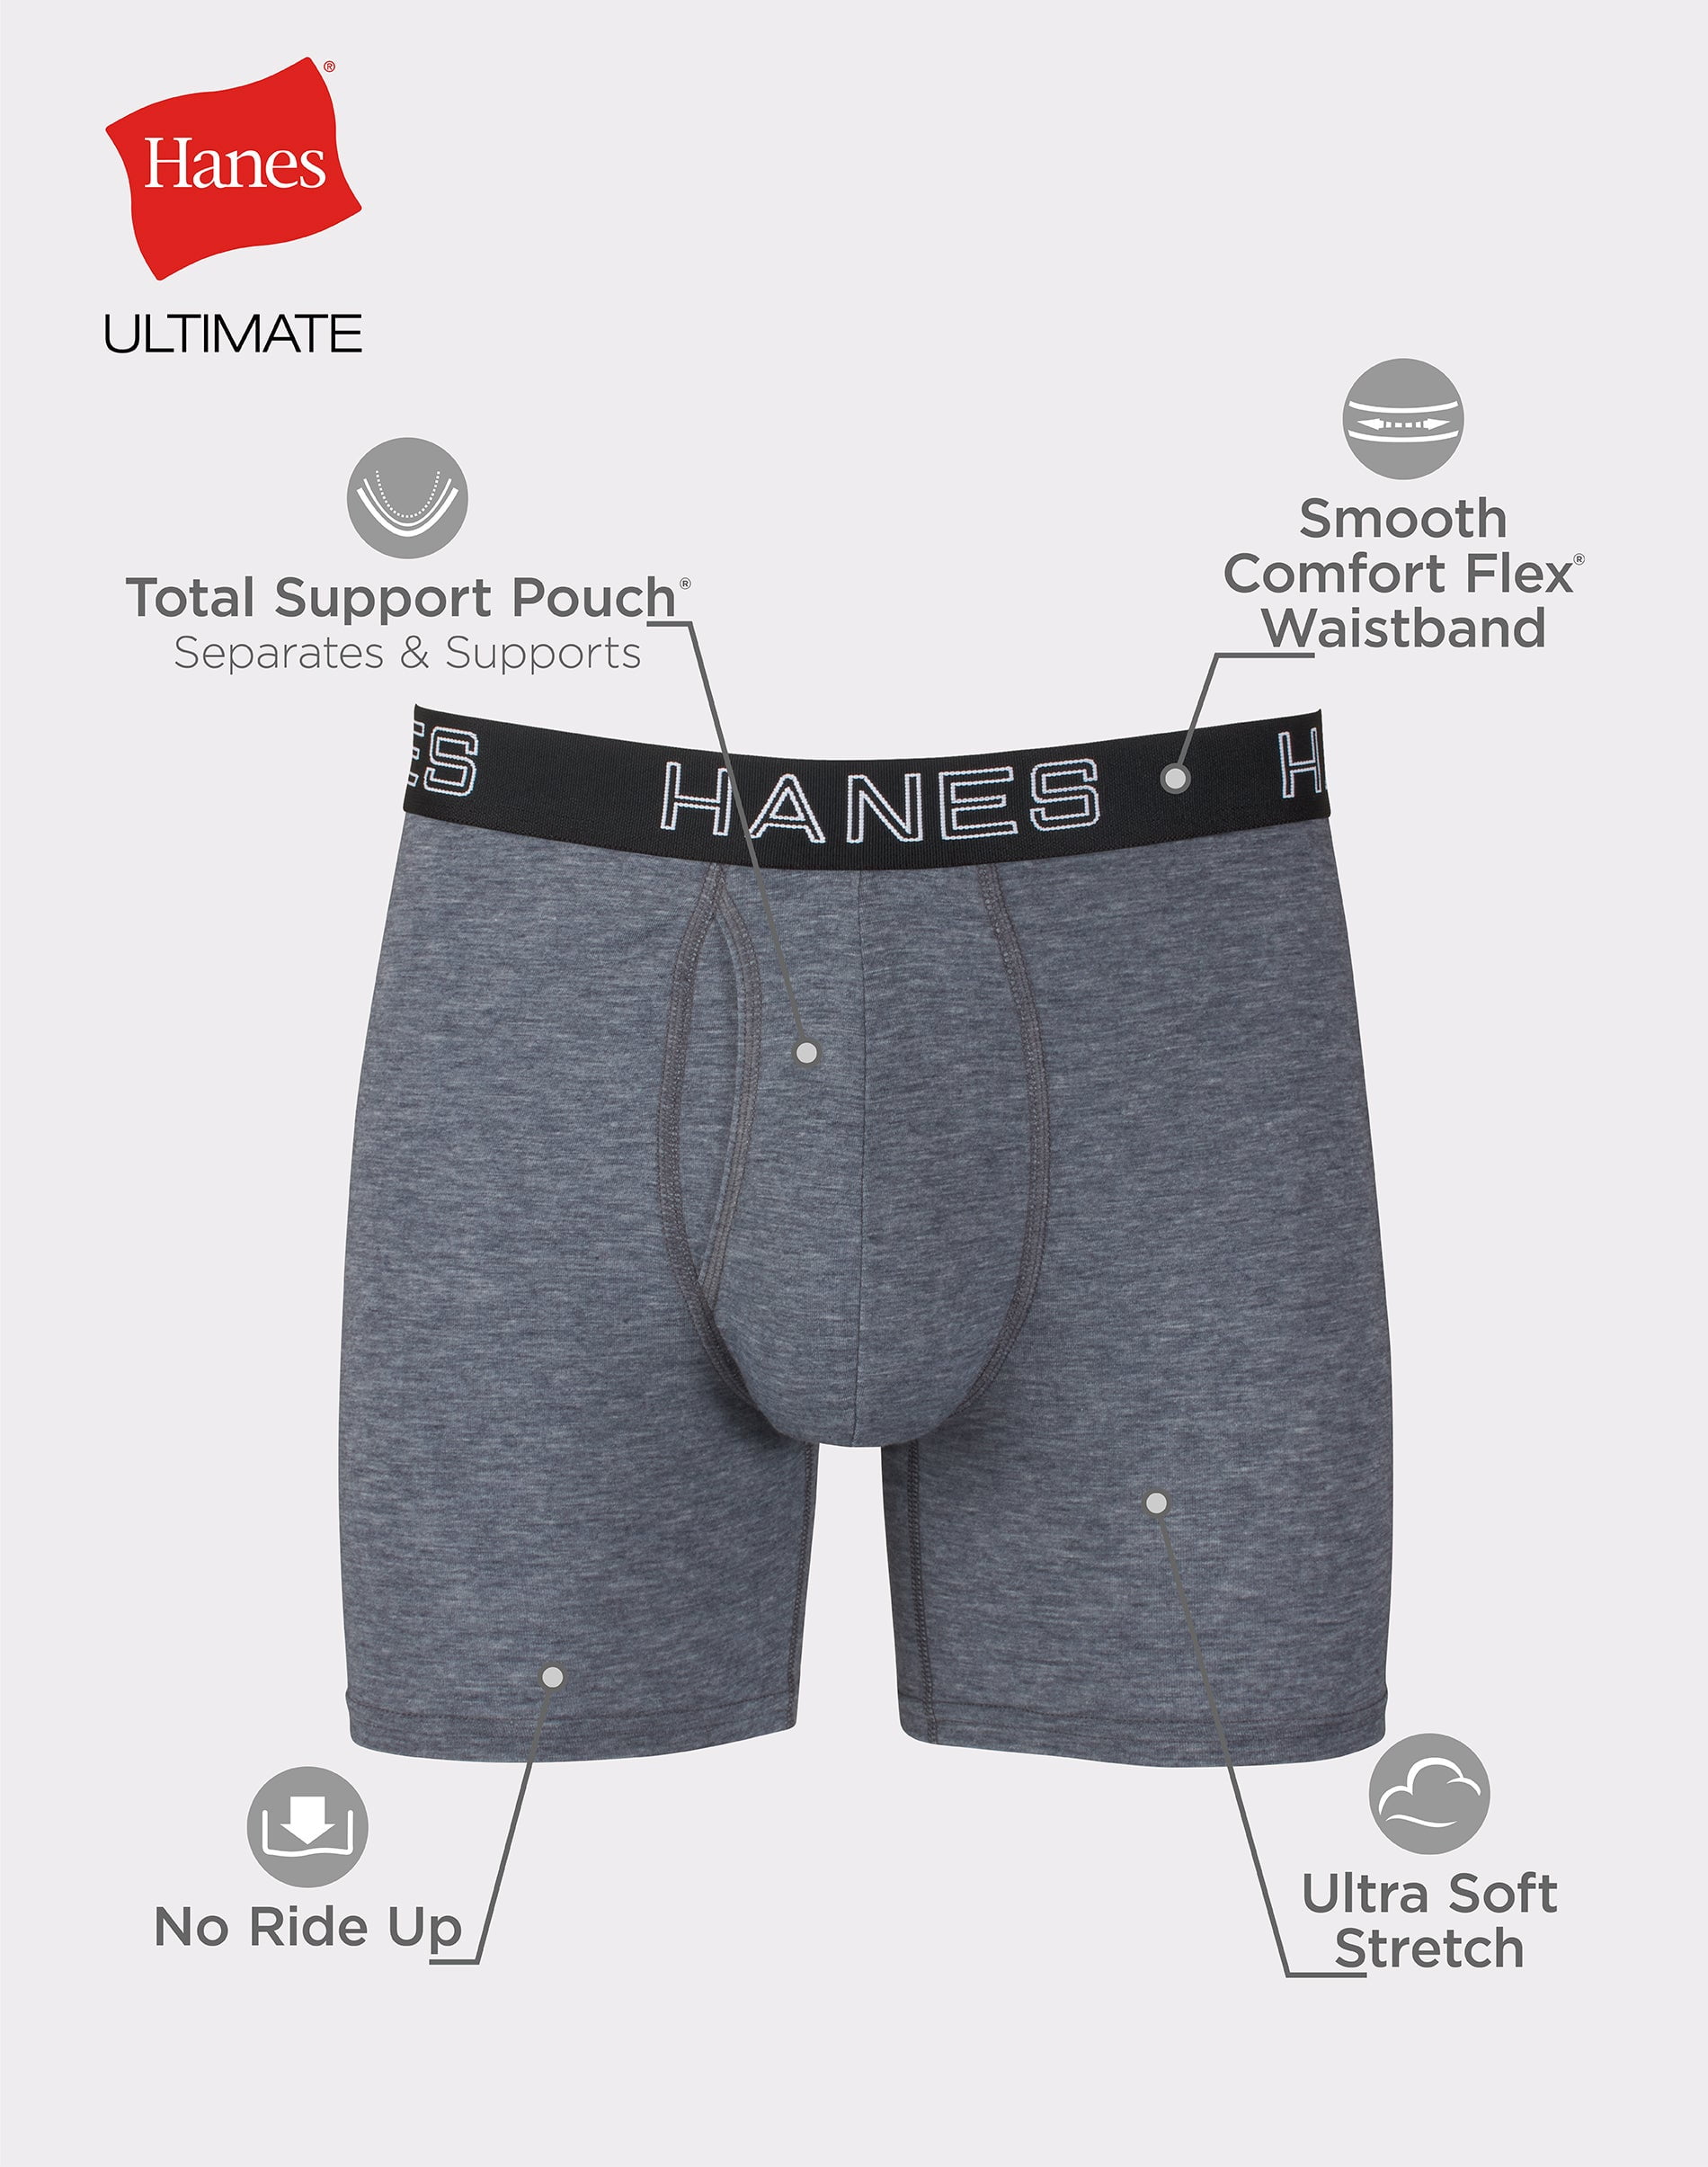 Hanes Ultimate Comfort Flex Fit Total Support Pouch Brief, 2XL - Kroger